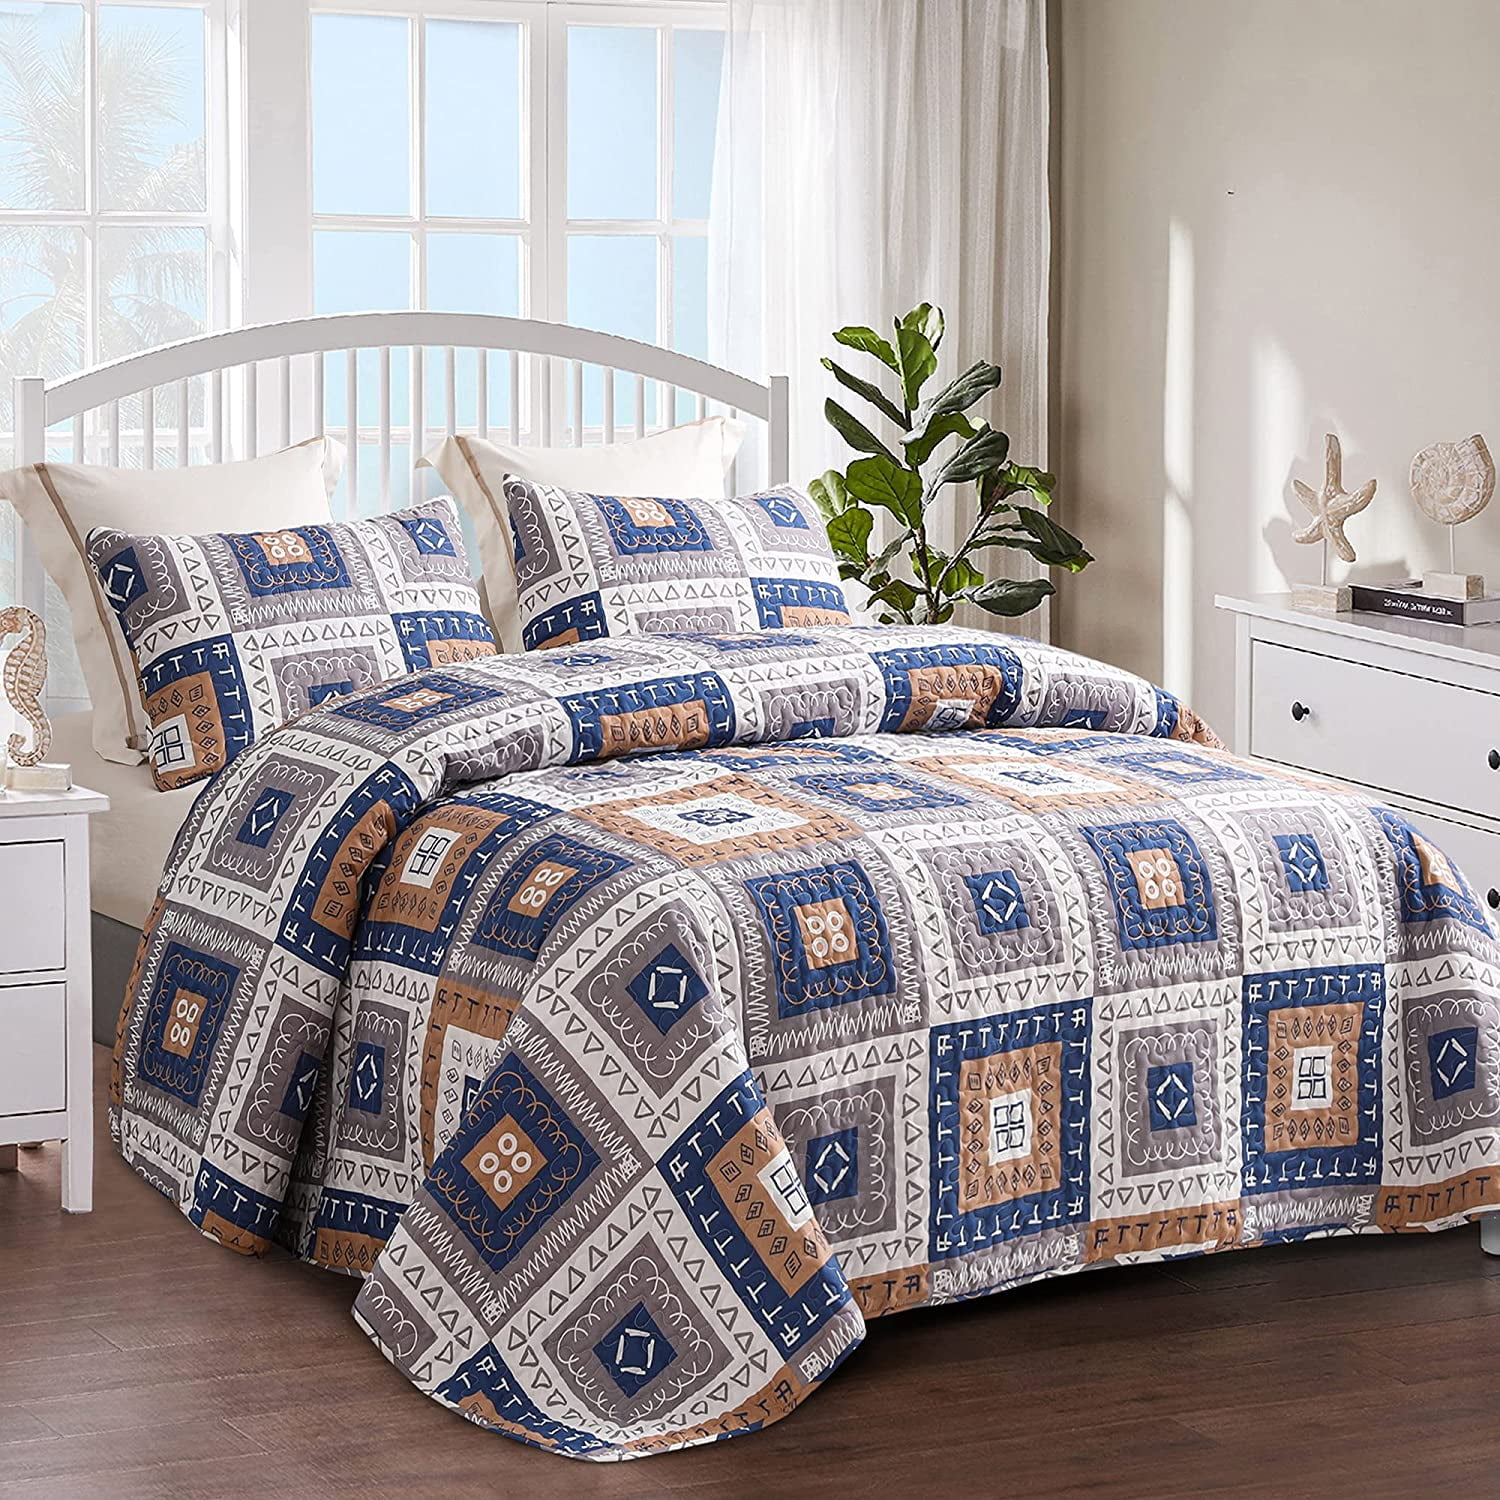 Stone Queen Stylemaster Provence Matelasse Bedspread